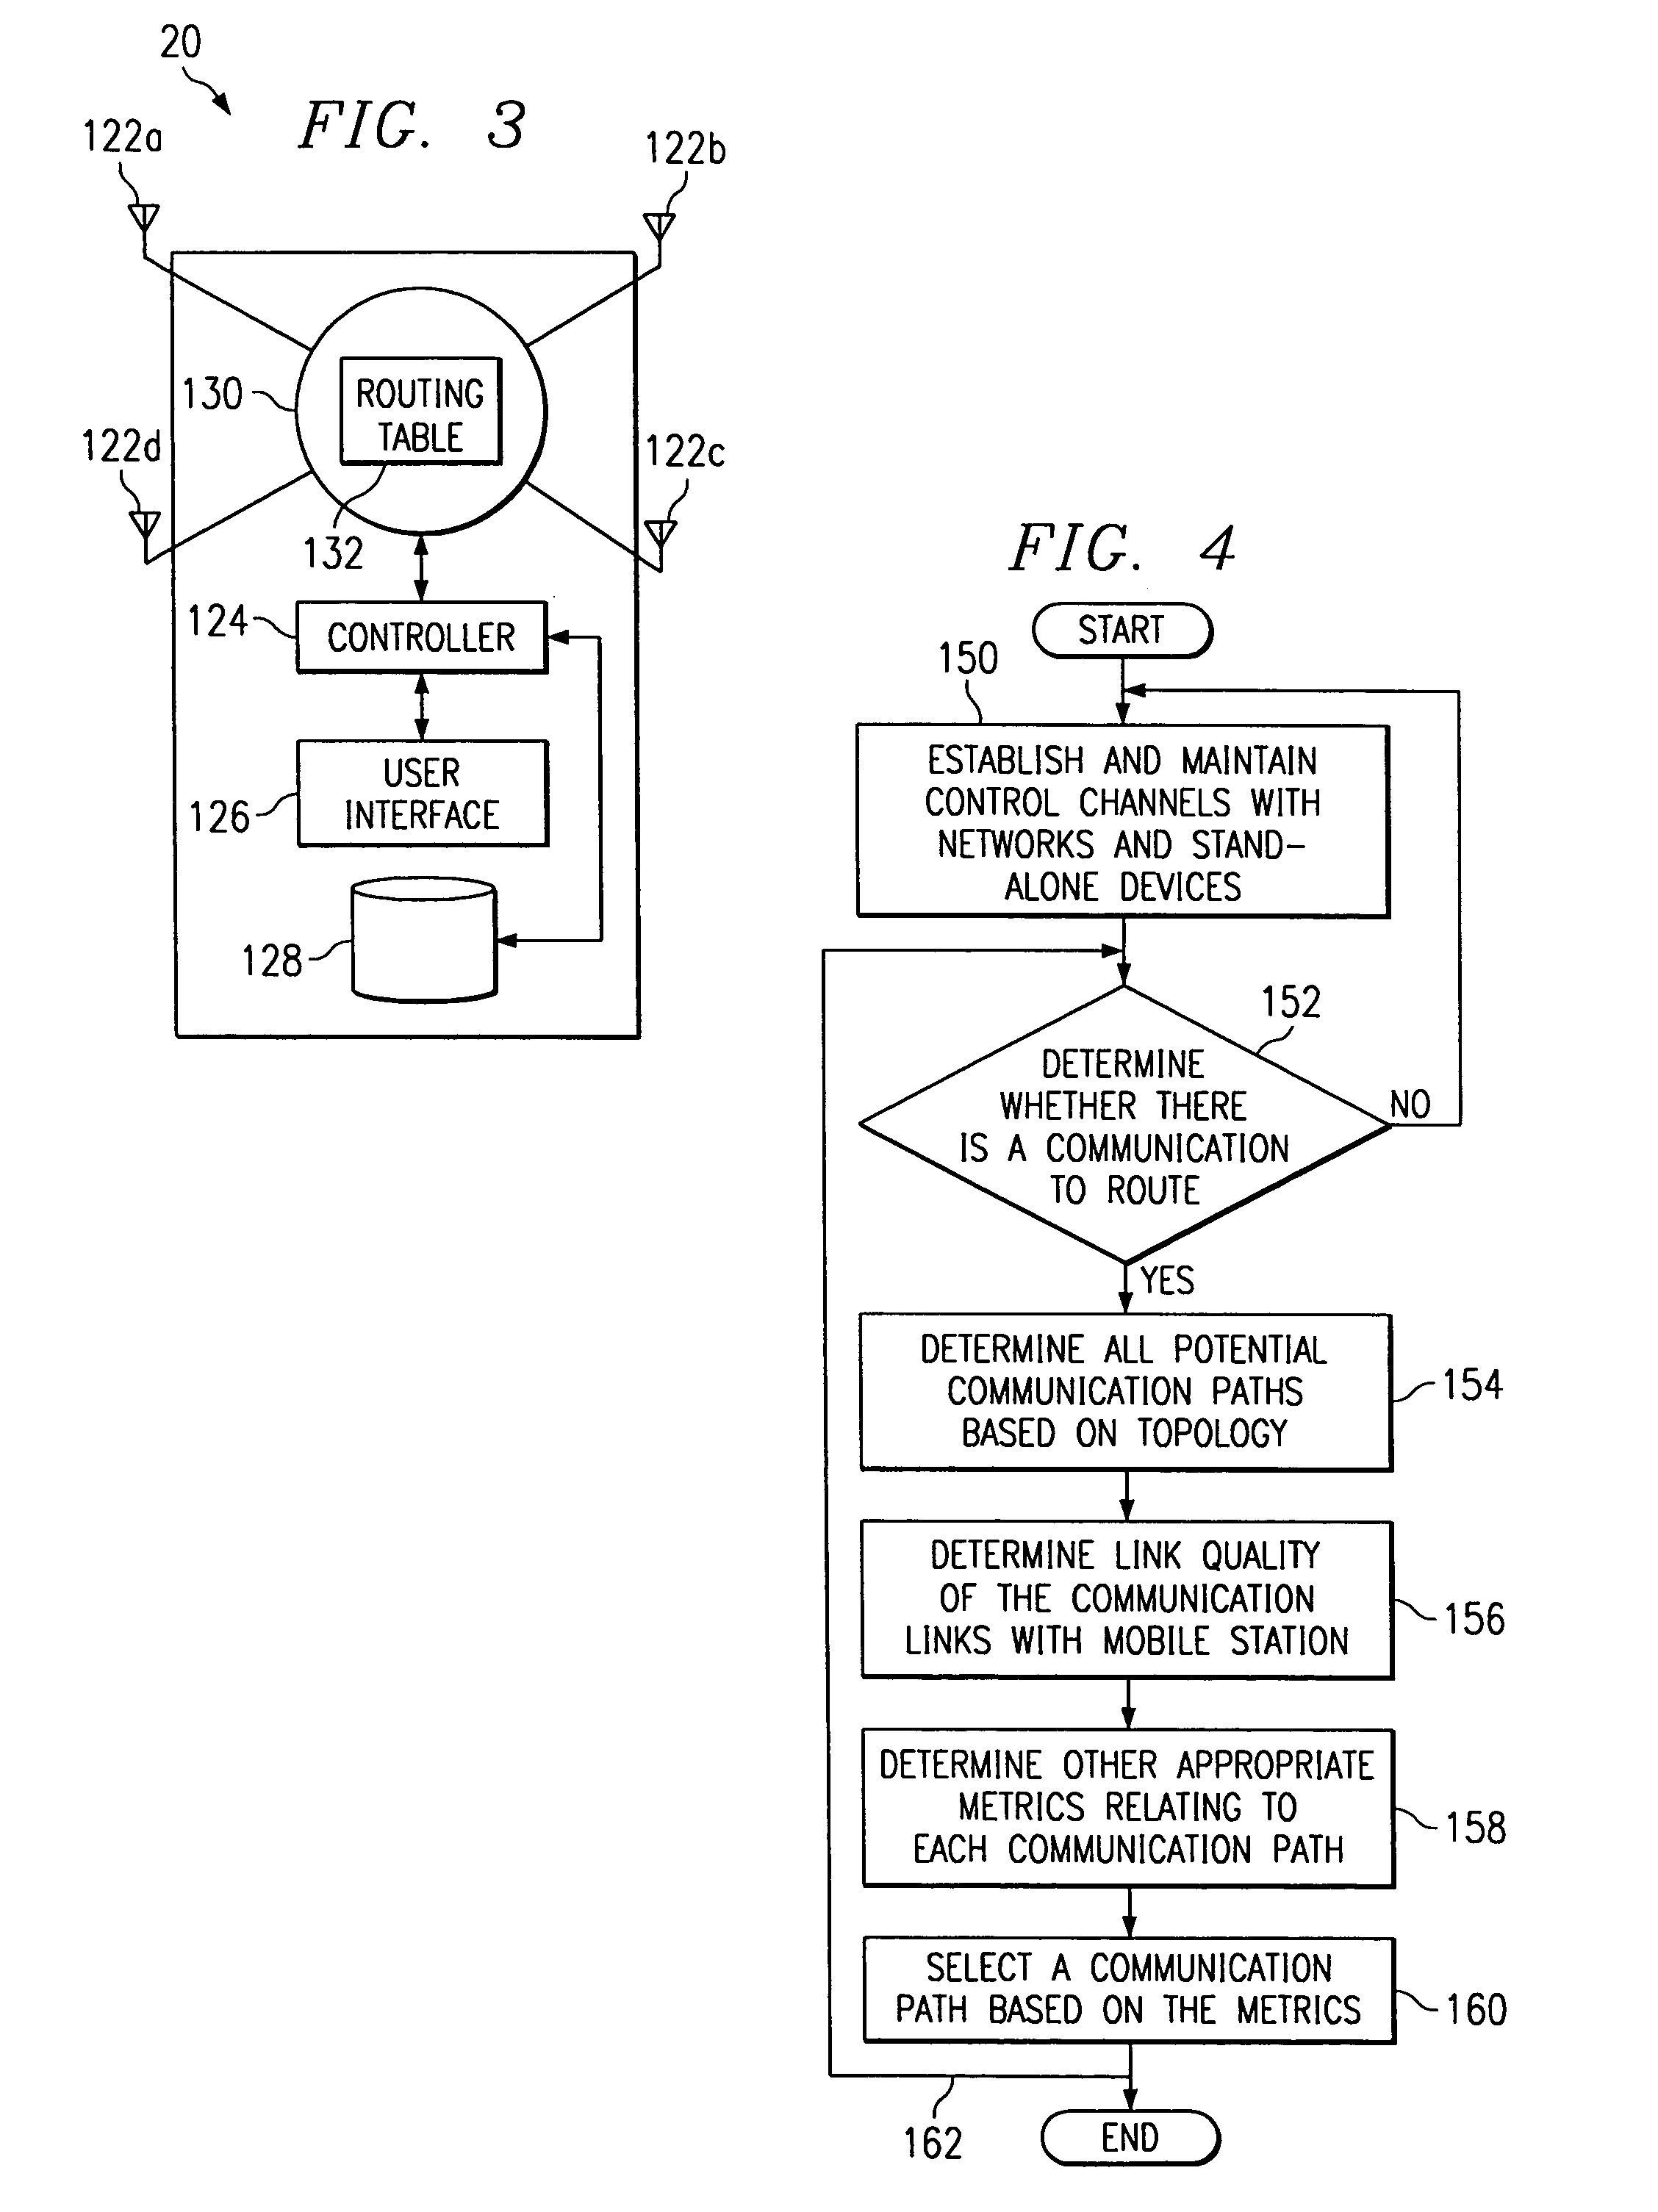 System and method for re-routing communications based on wireless communication link quality